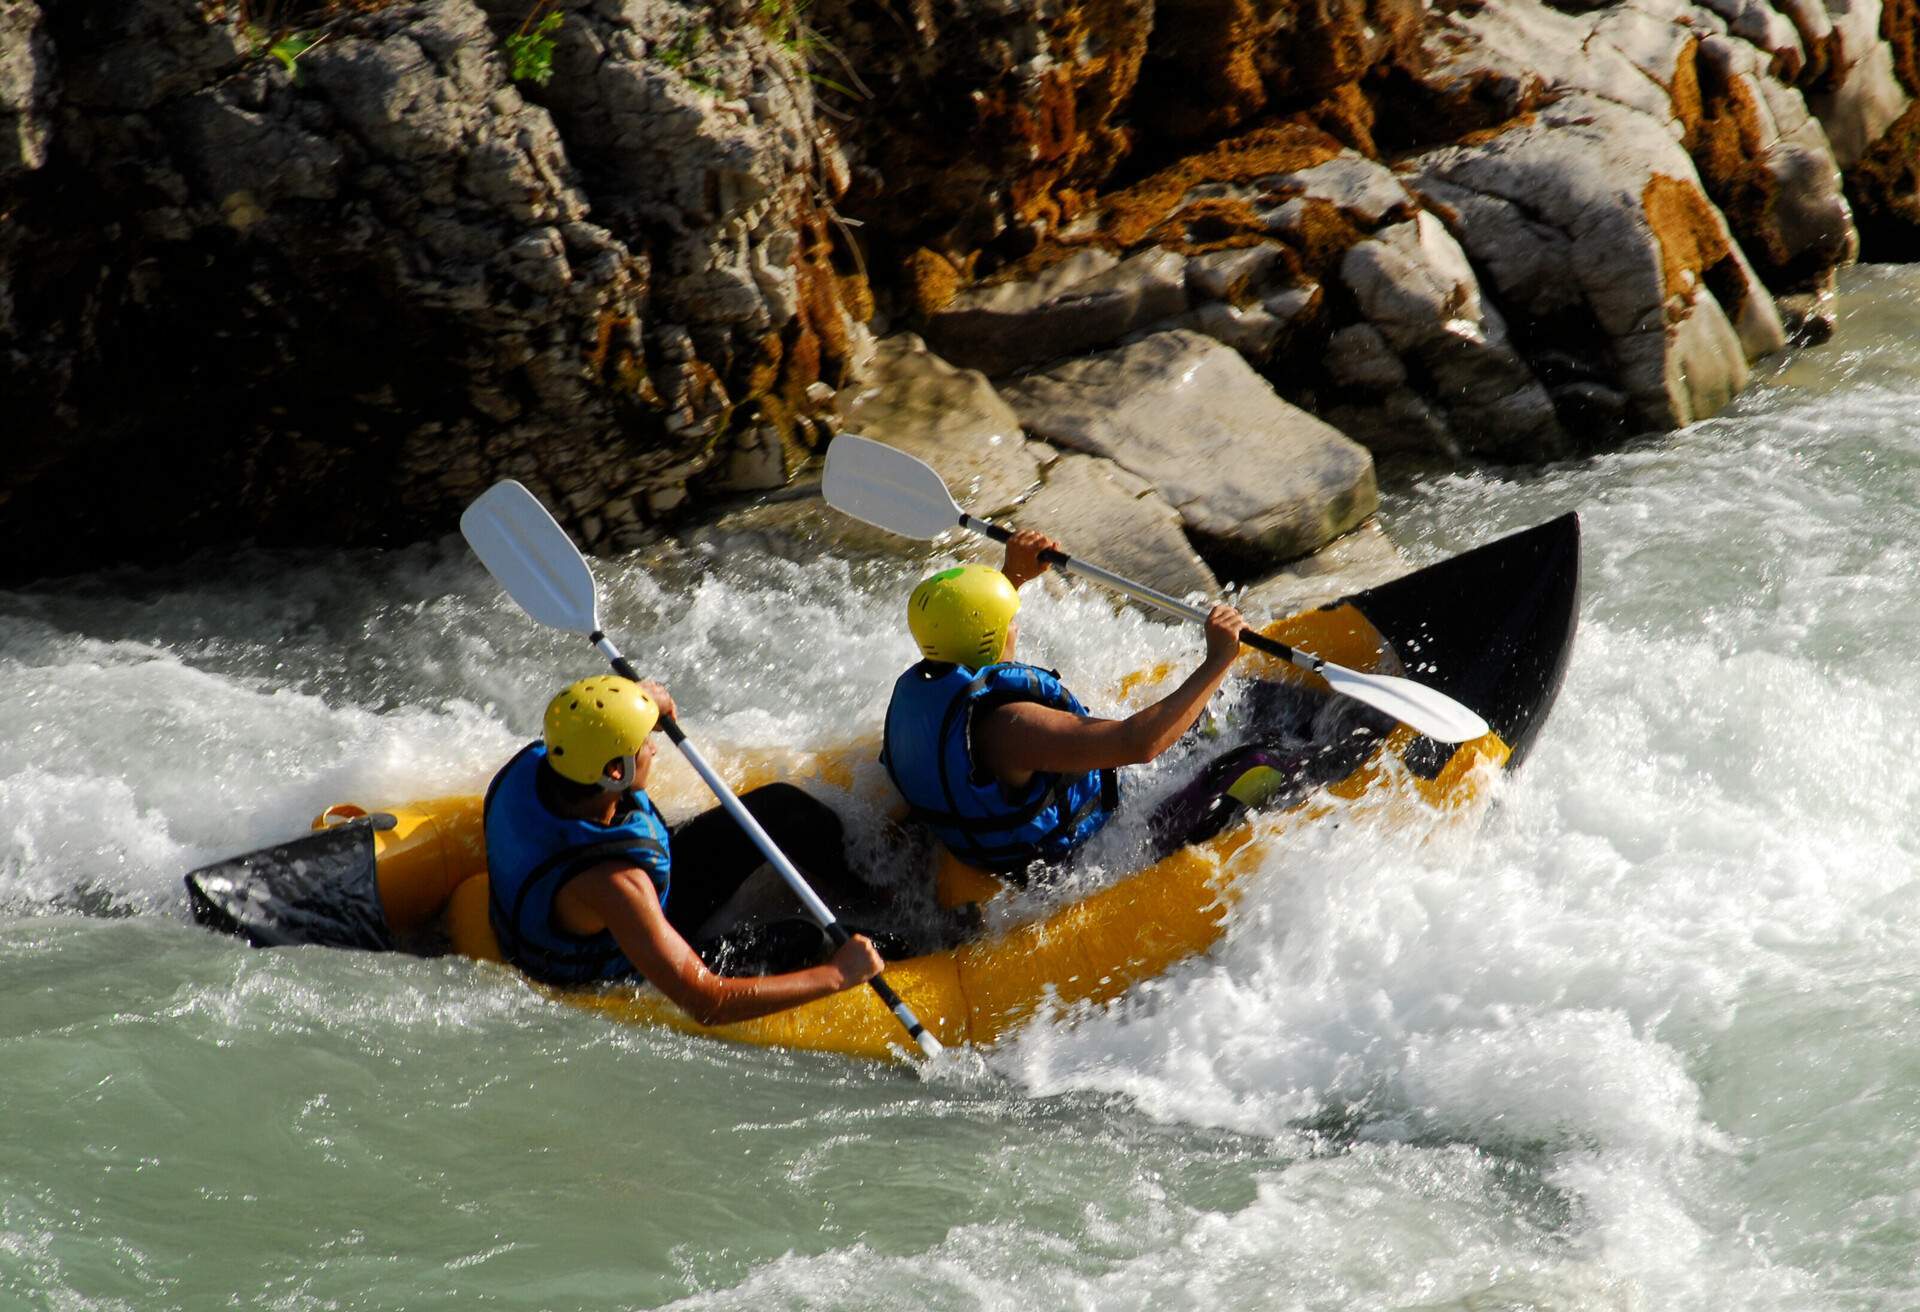 Two people in a yellow boat with life jackets and helmets are rafting on a fast river.